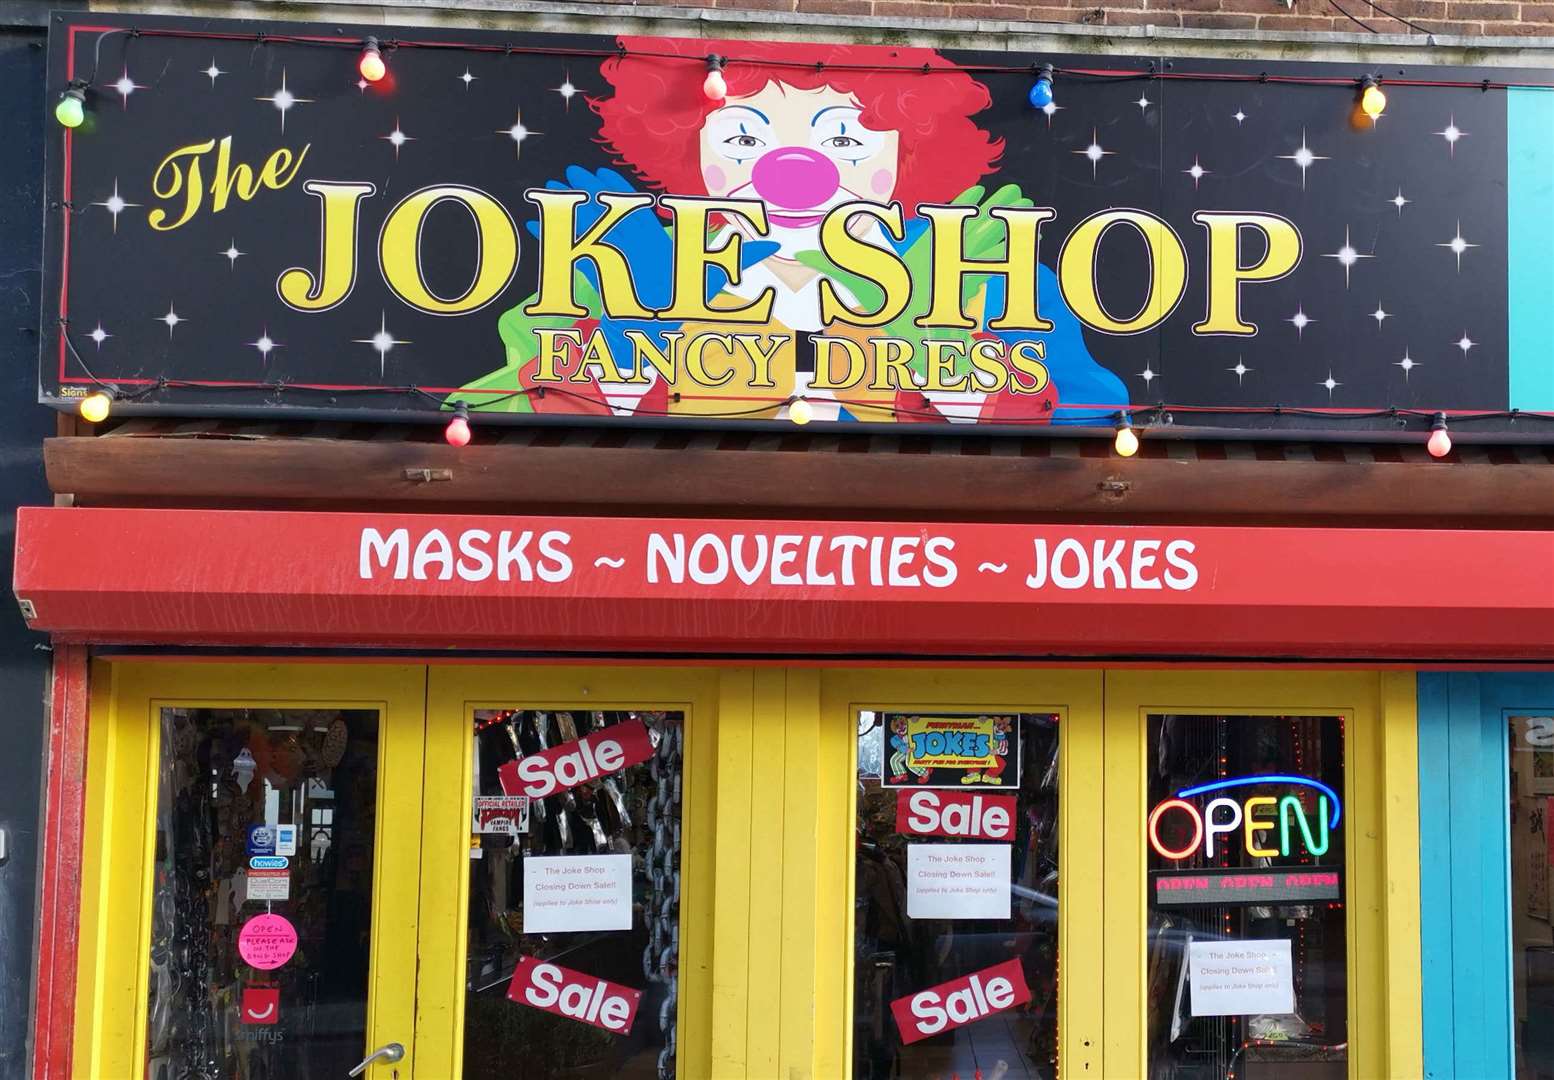 The joke shop has been a presence in the town since the 70s